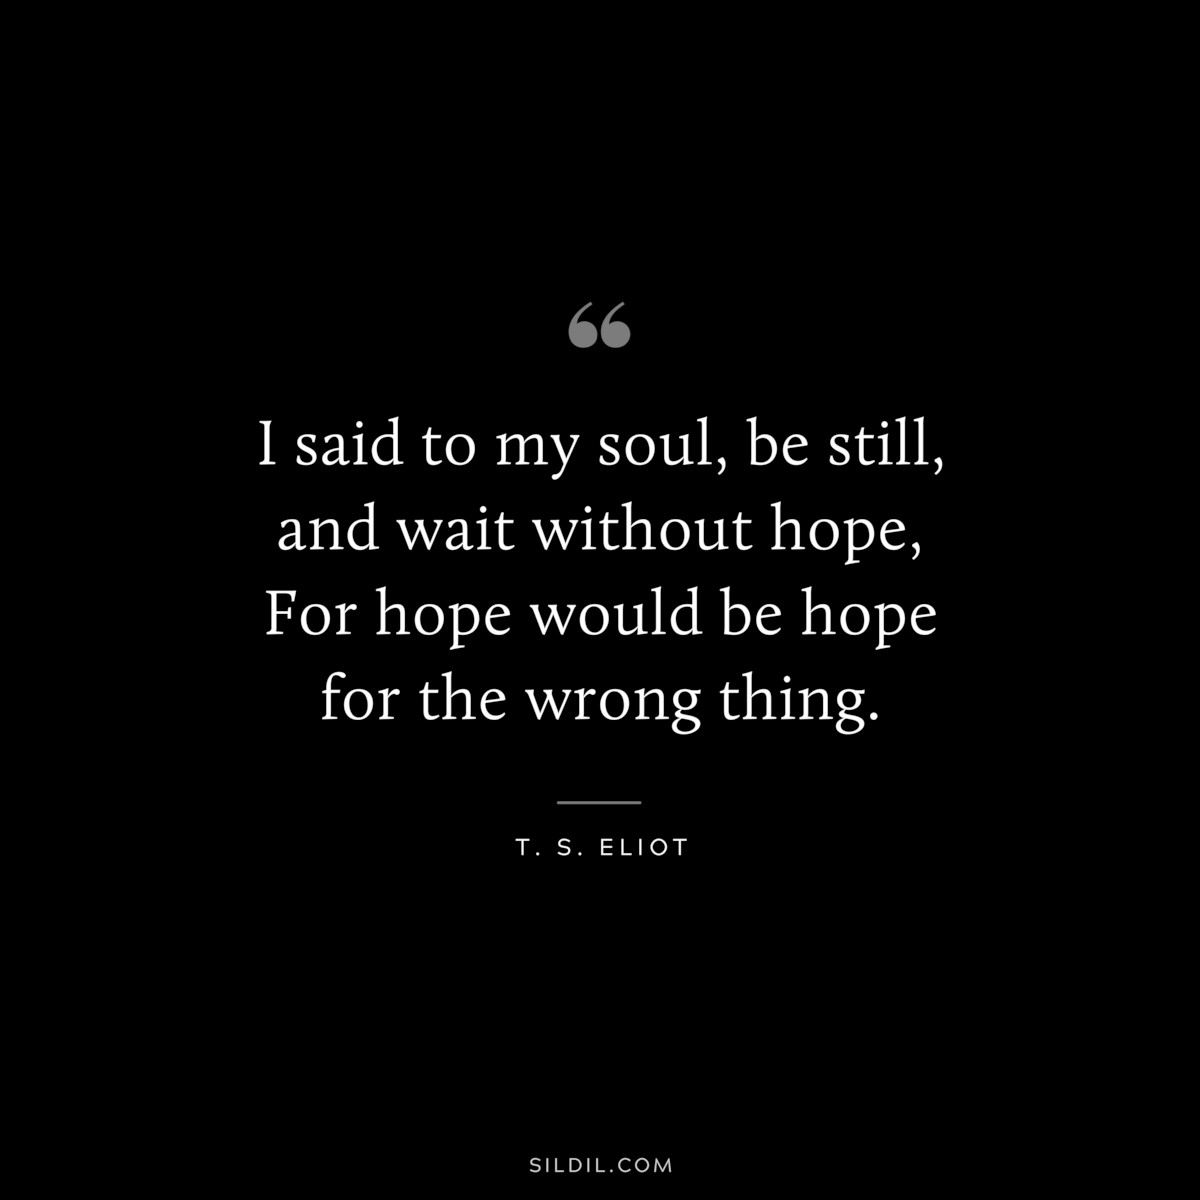 I said to my soul, be still, and wait without hope, For hope would be hope for the wrong thing. ― T. S. Eliot